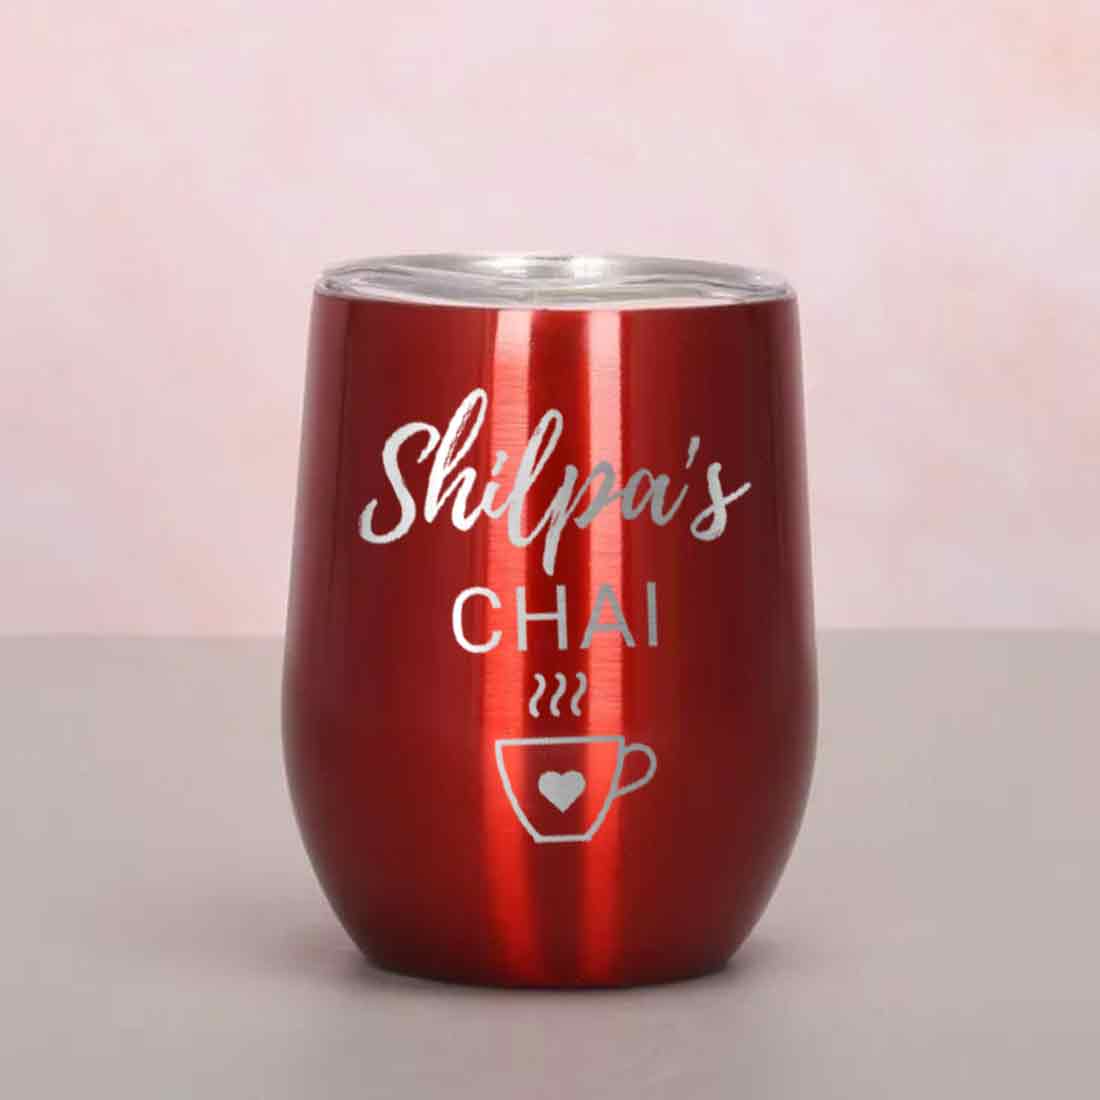 Personalized Coffee Thermos Cup With Name Engraved (350 ML) -Tea Cup